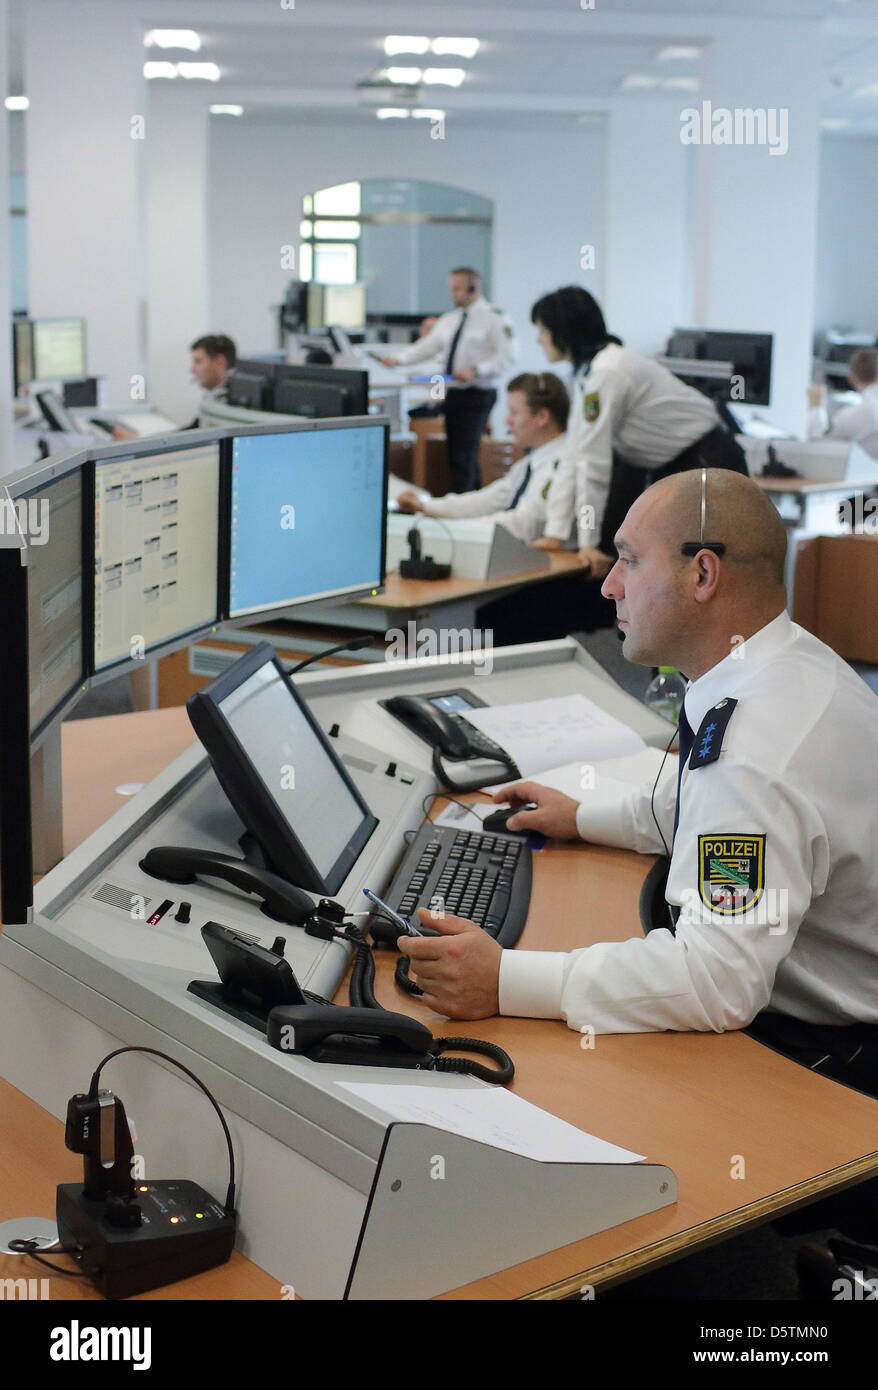 Police officers work in the new Police Operations Centre (LFZ) of police department Saxony-Anhalt North in magdeburg, Germany, 28 November 2012. The operations centre was inaugurated on the same day. the centre cost 5.3 million euro to build and is supposed to coordinate more effectively emergency calls from Magdebrg and six other administrative districts with a total of 1.16 milli Stock Photo